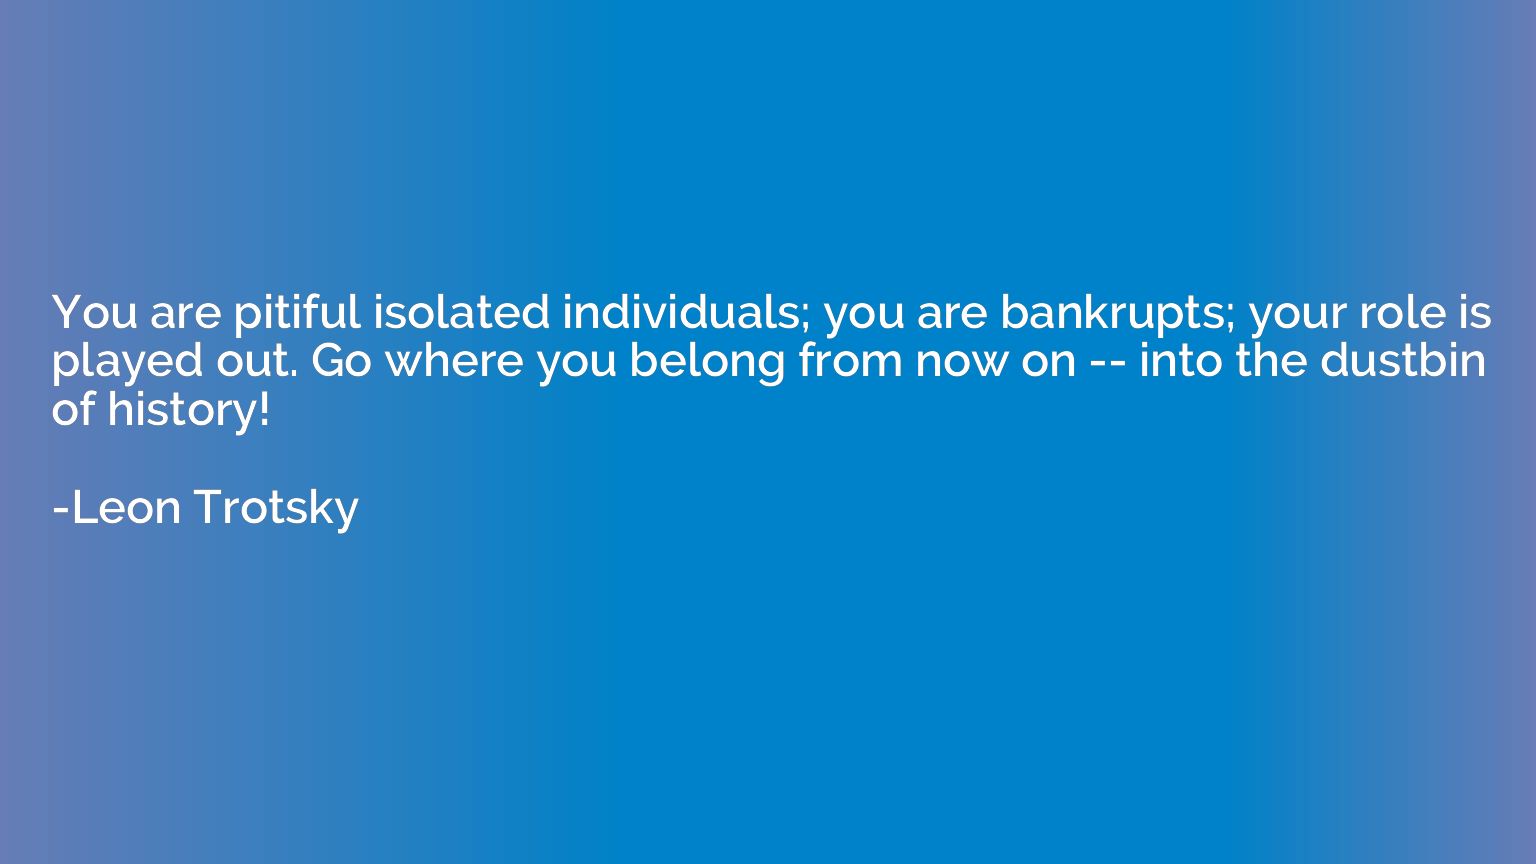 You are pitiful isolated individuals; you are bankrupts; you